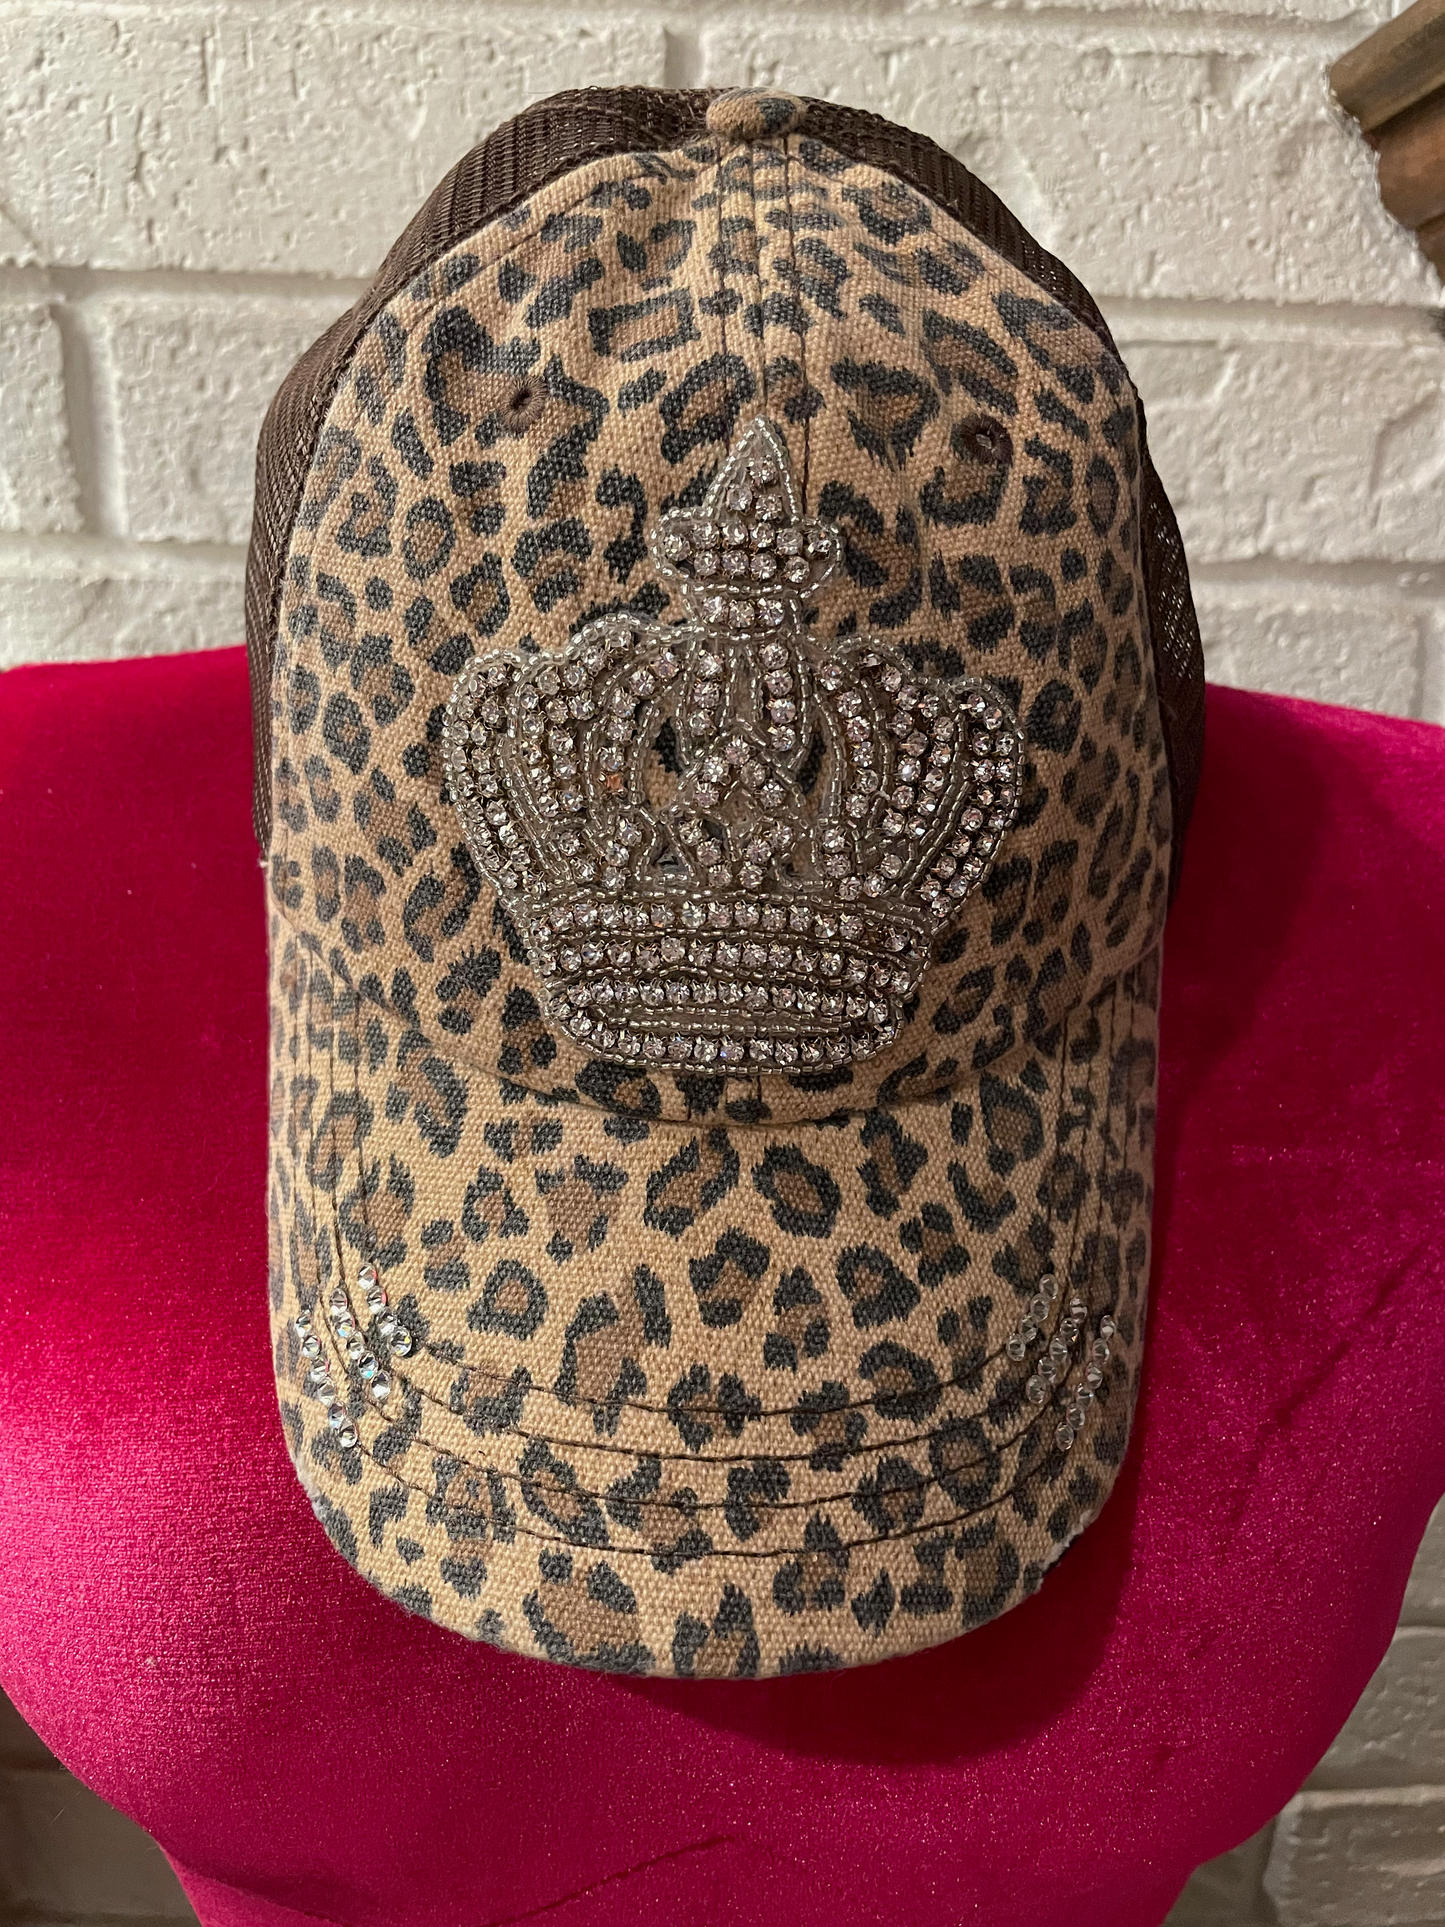 Scandalicious Rhinestone Cap Multiple colors/styles available